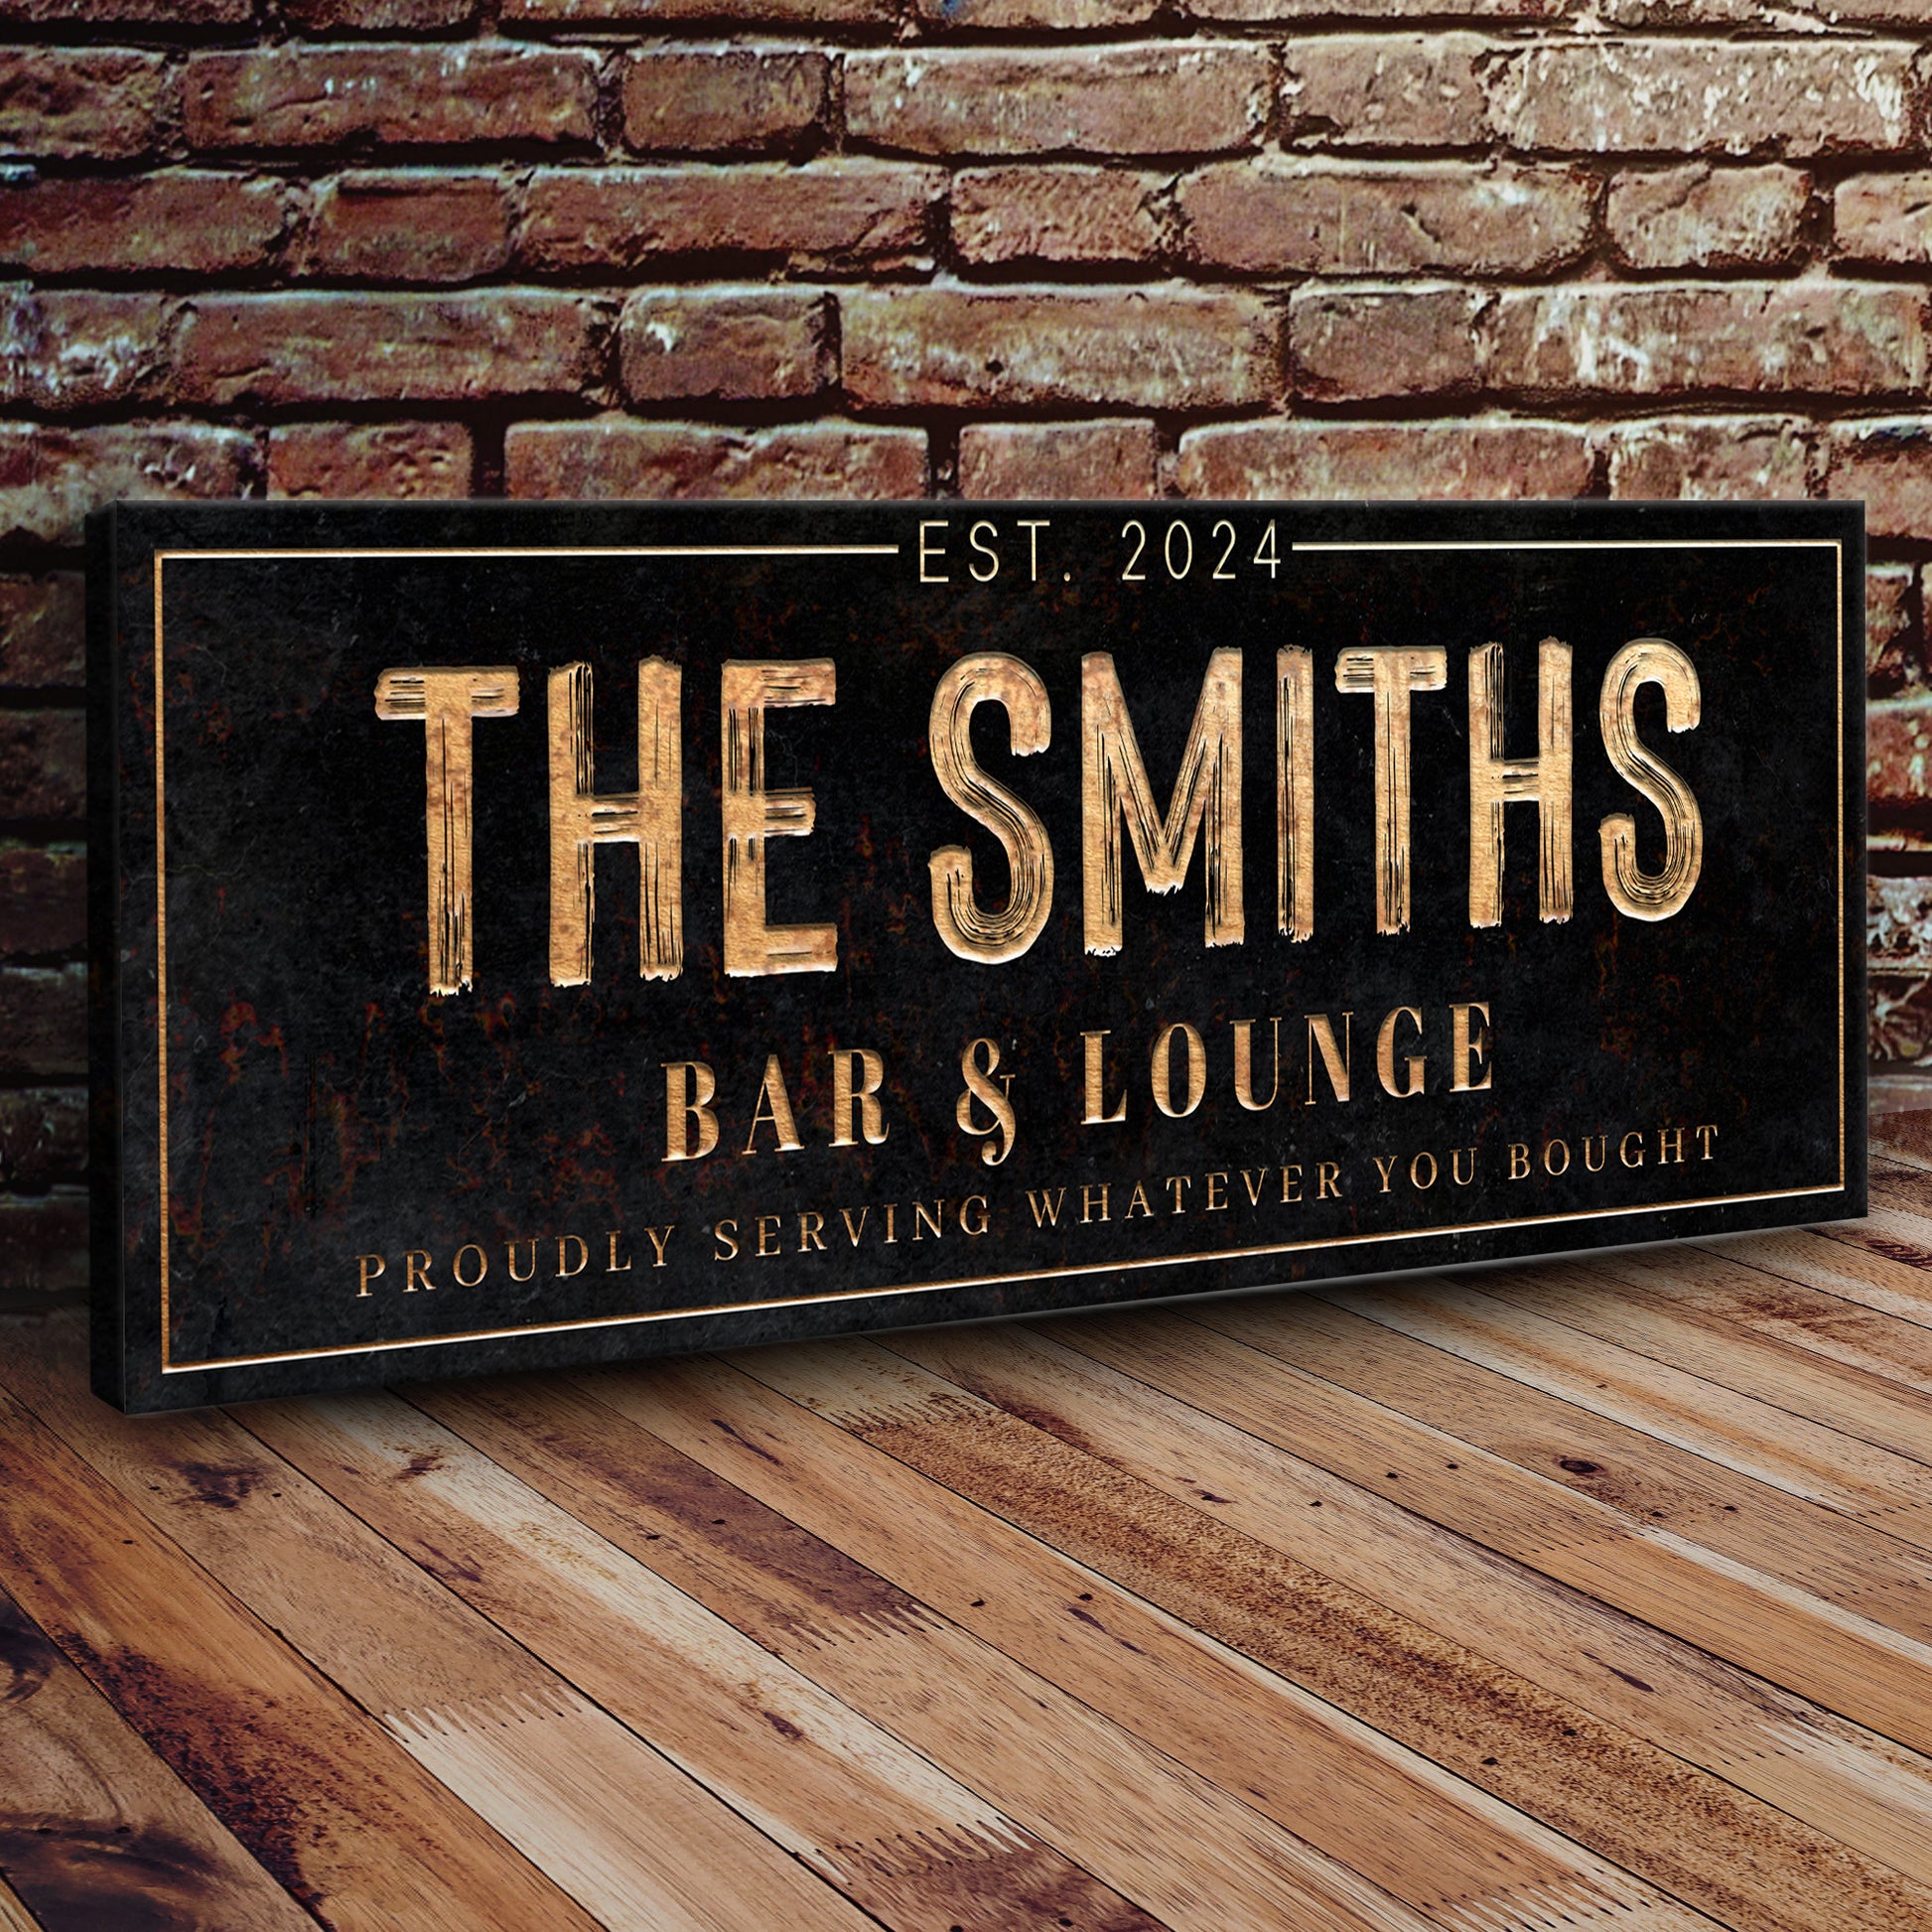 Custom Bar & Lounge Sign  - Image by Tailored Canvases